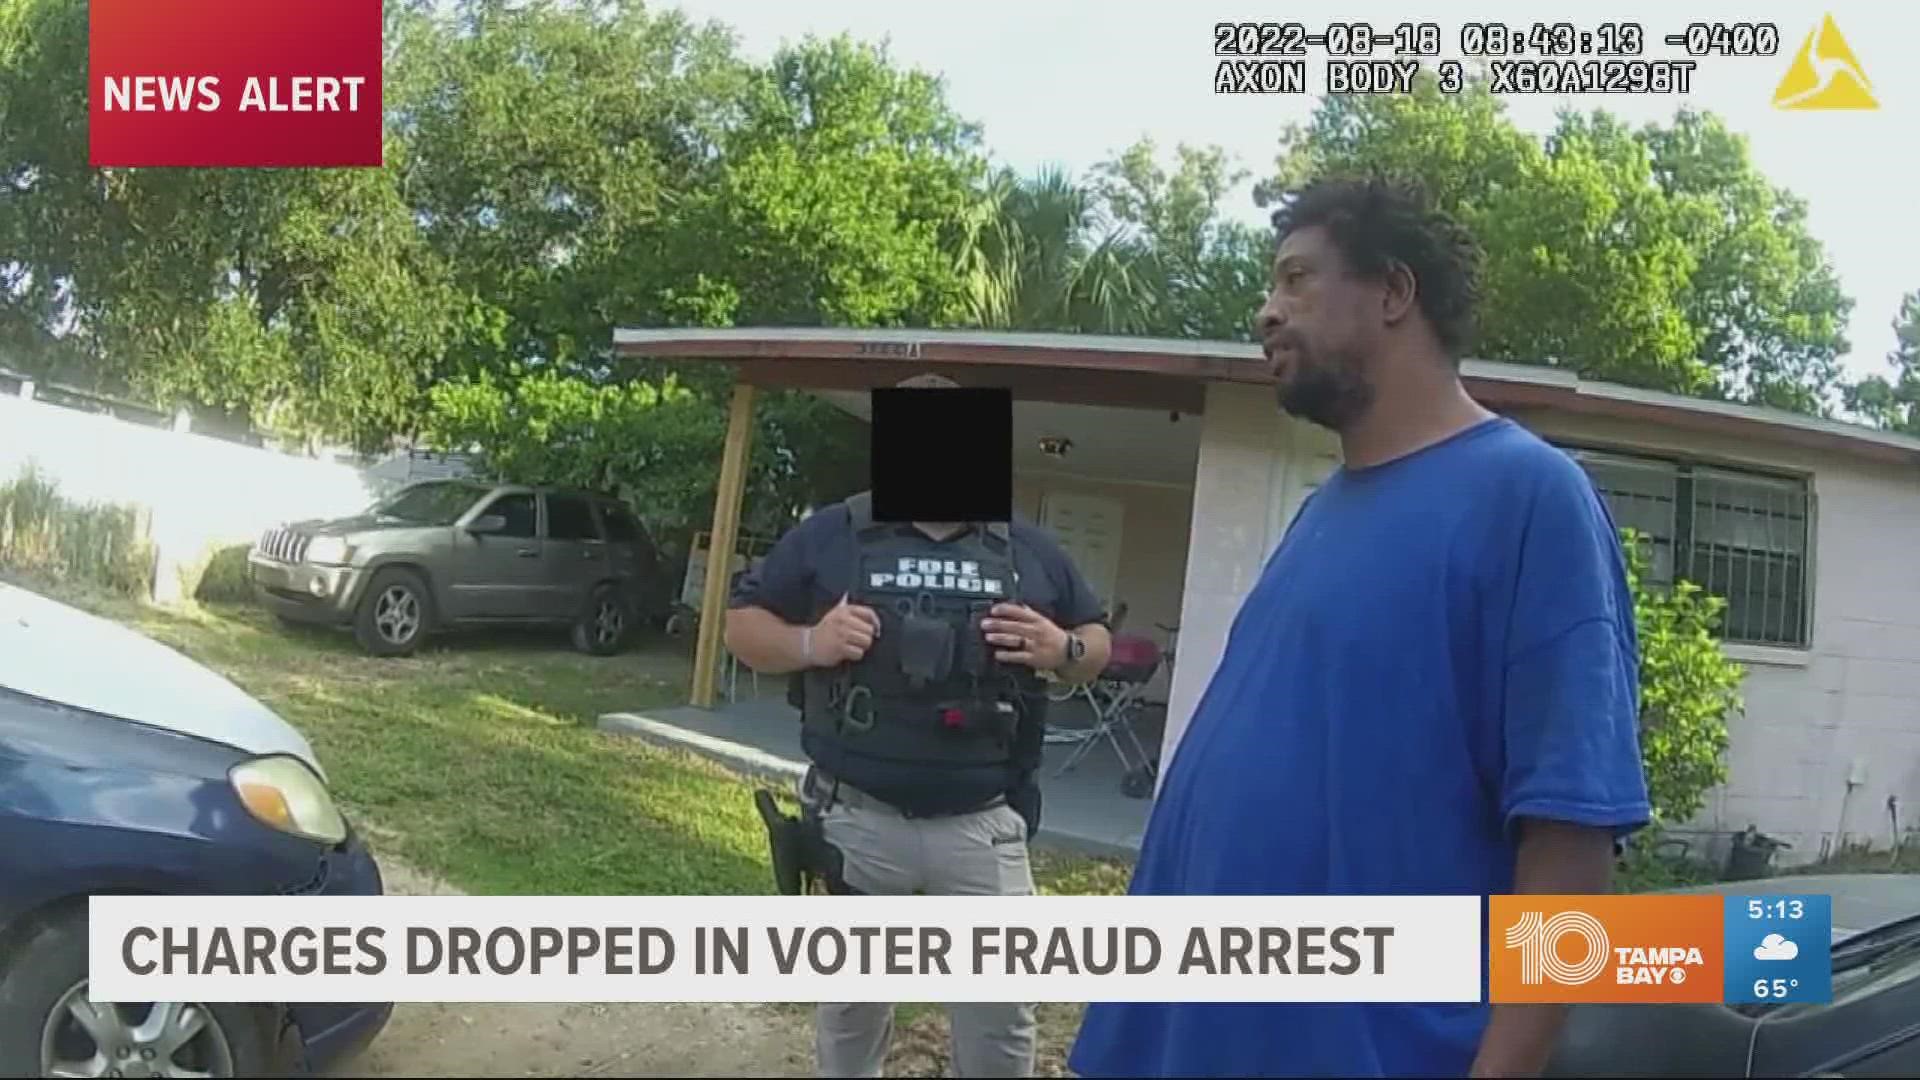 Tony Patterson was one of 20 former felons arrested for voter fraud earlier this year.